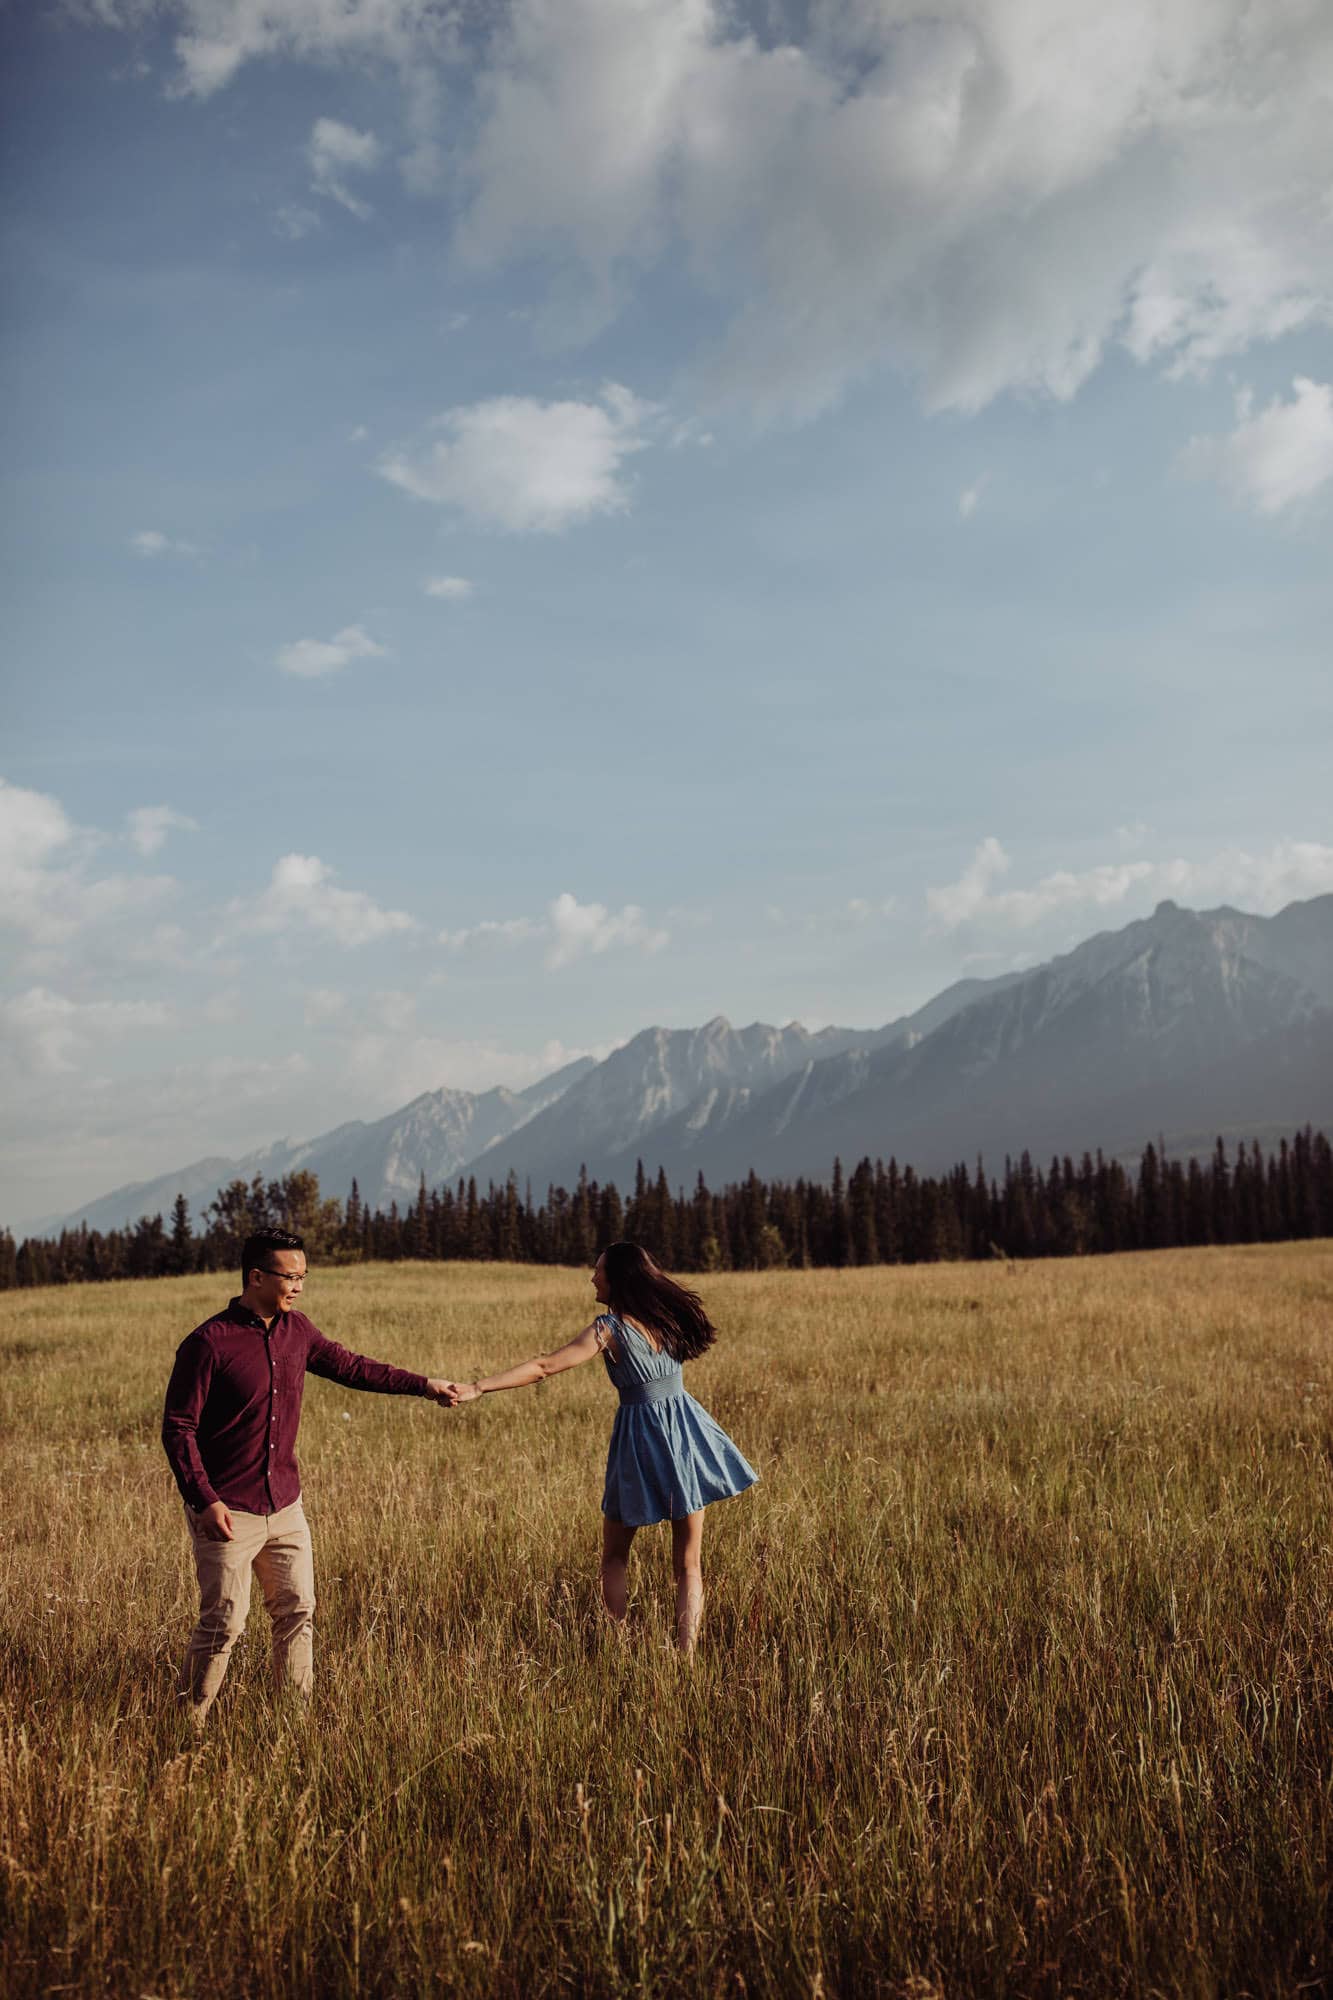 Banff Montreal Wedding Canmore Engagement Banff Montreal Traveling Destination Photographer Brent Calis Field Mountains